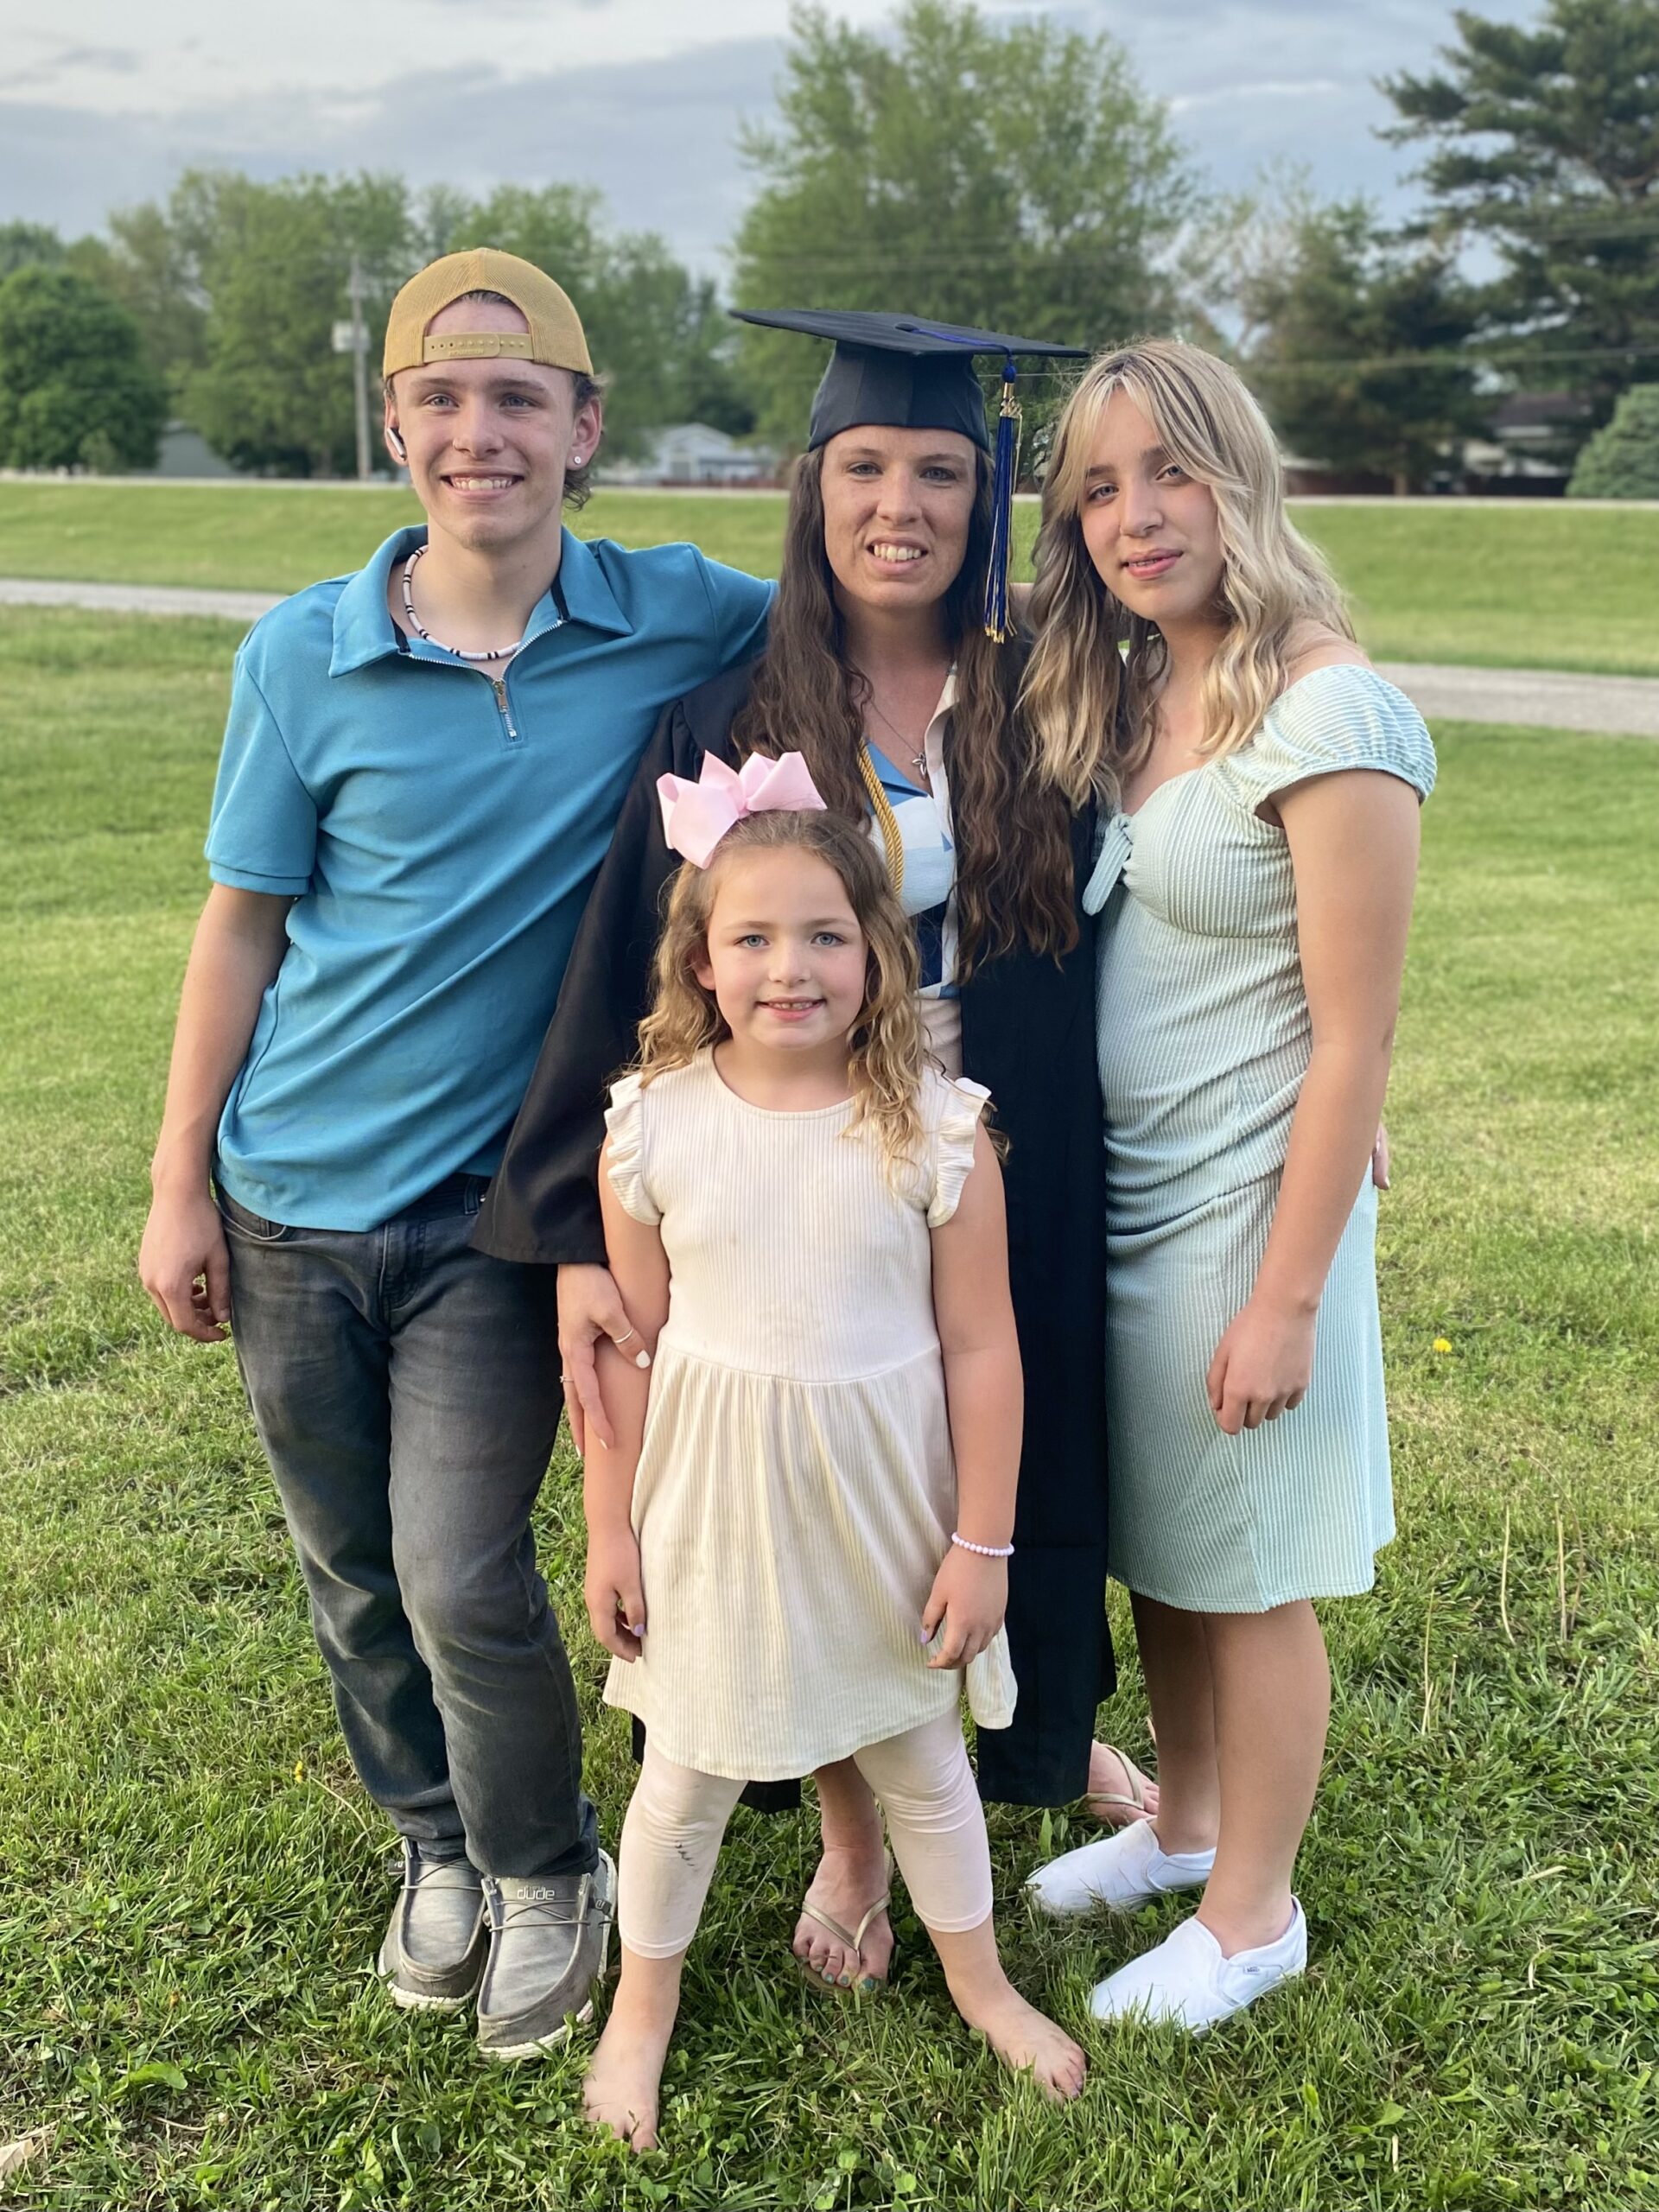 Jenna with her family taking a picture when she graduated